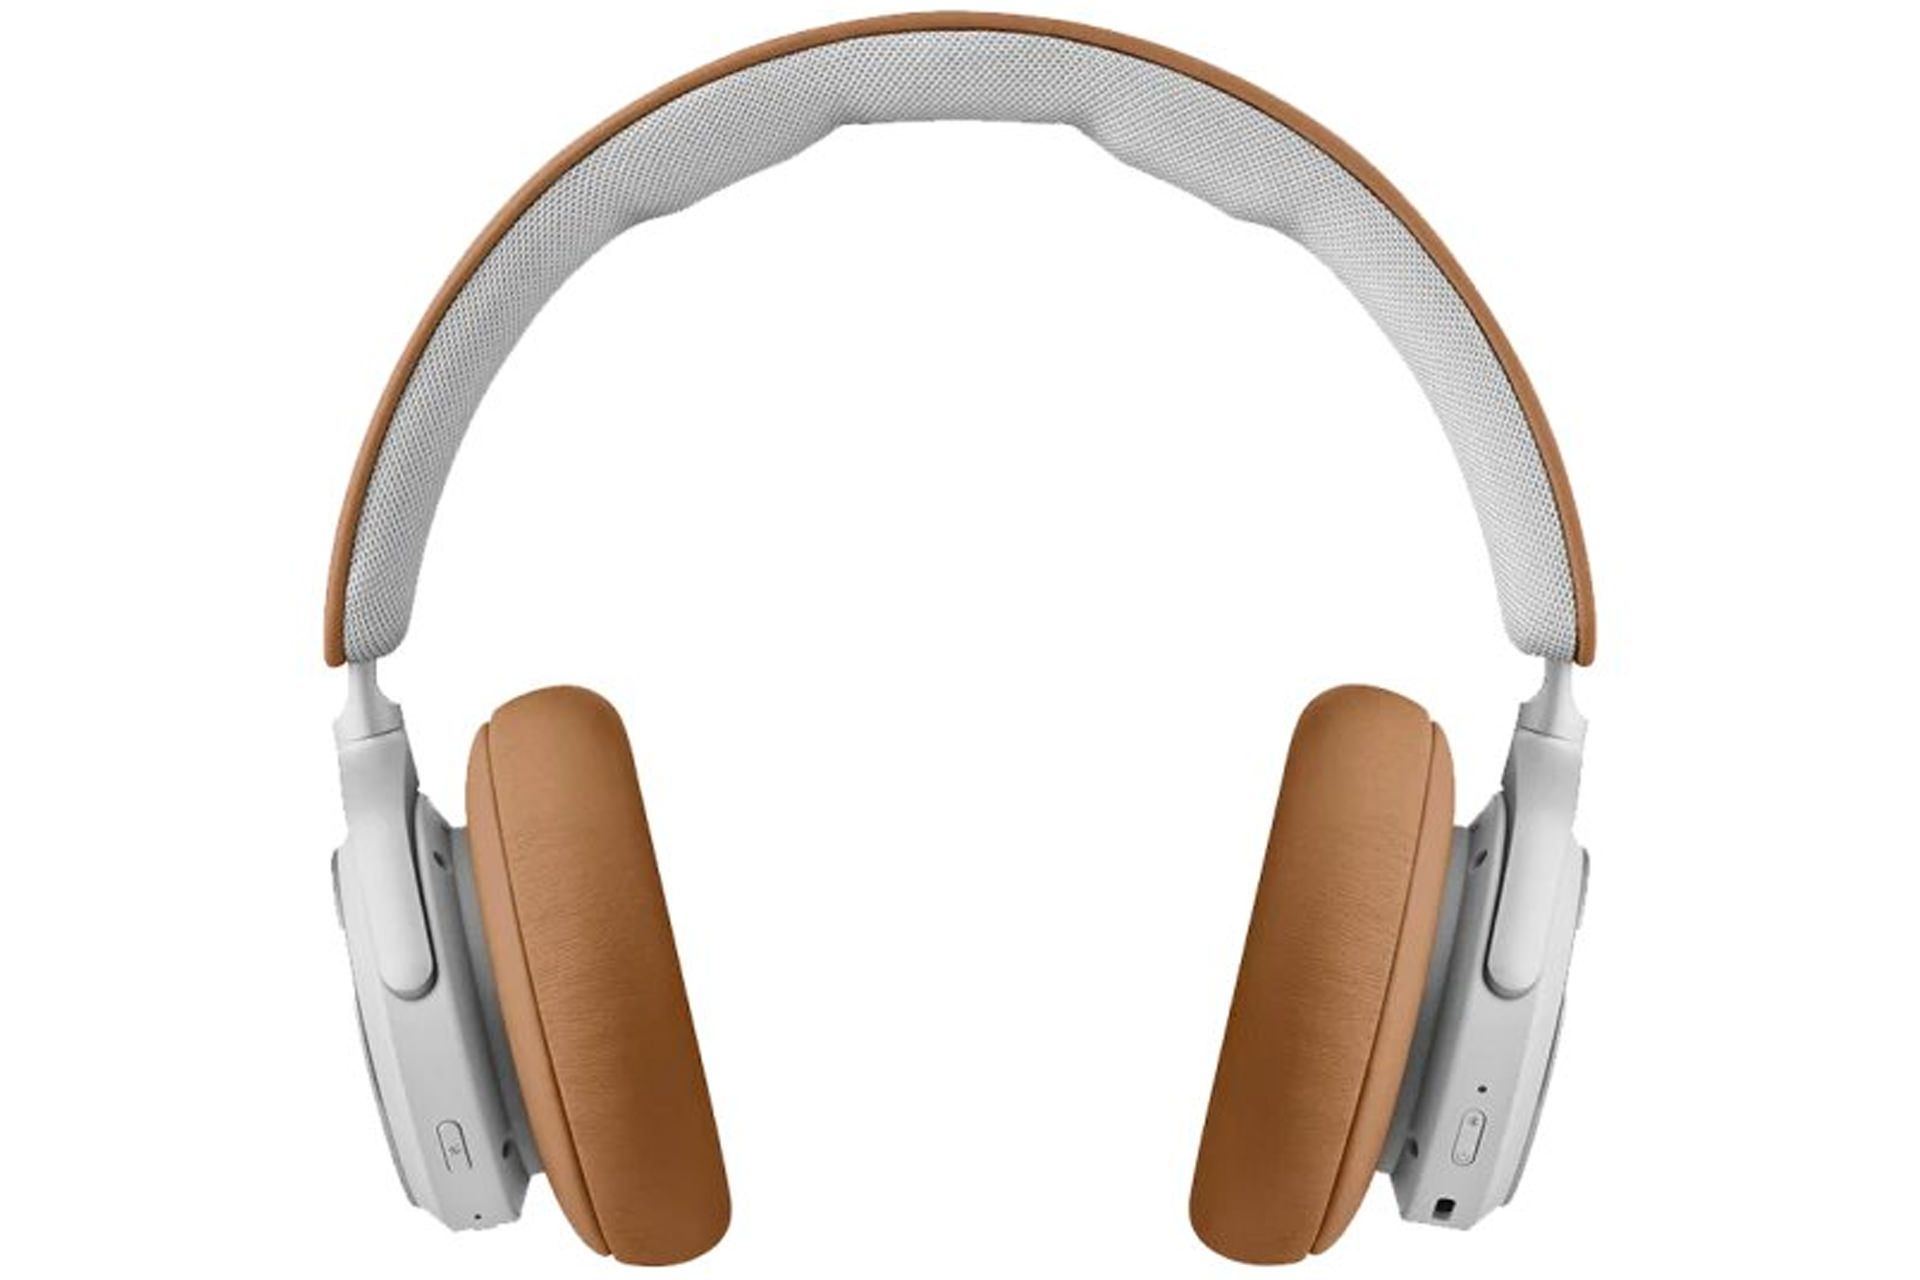 Bang & Olafsen B&O Beoplay HX wooden headphones from the front